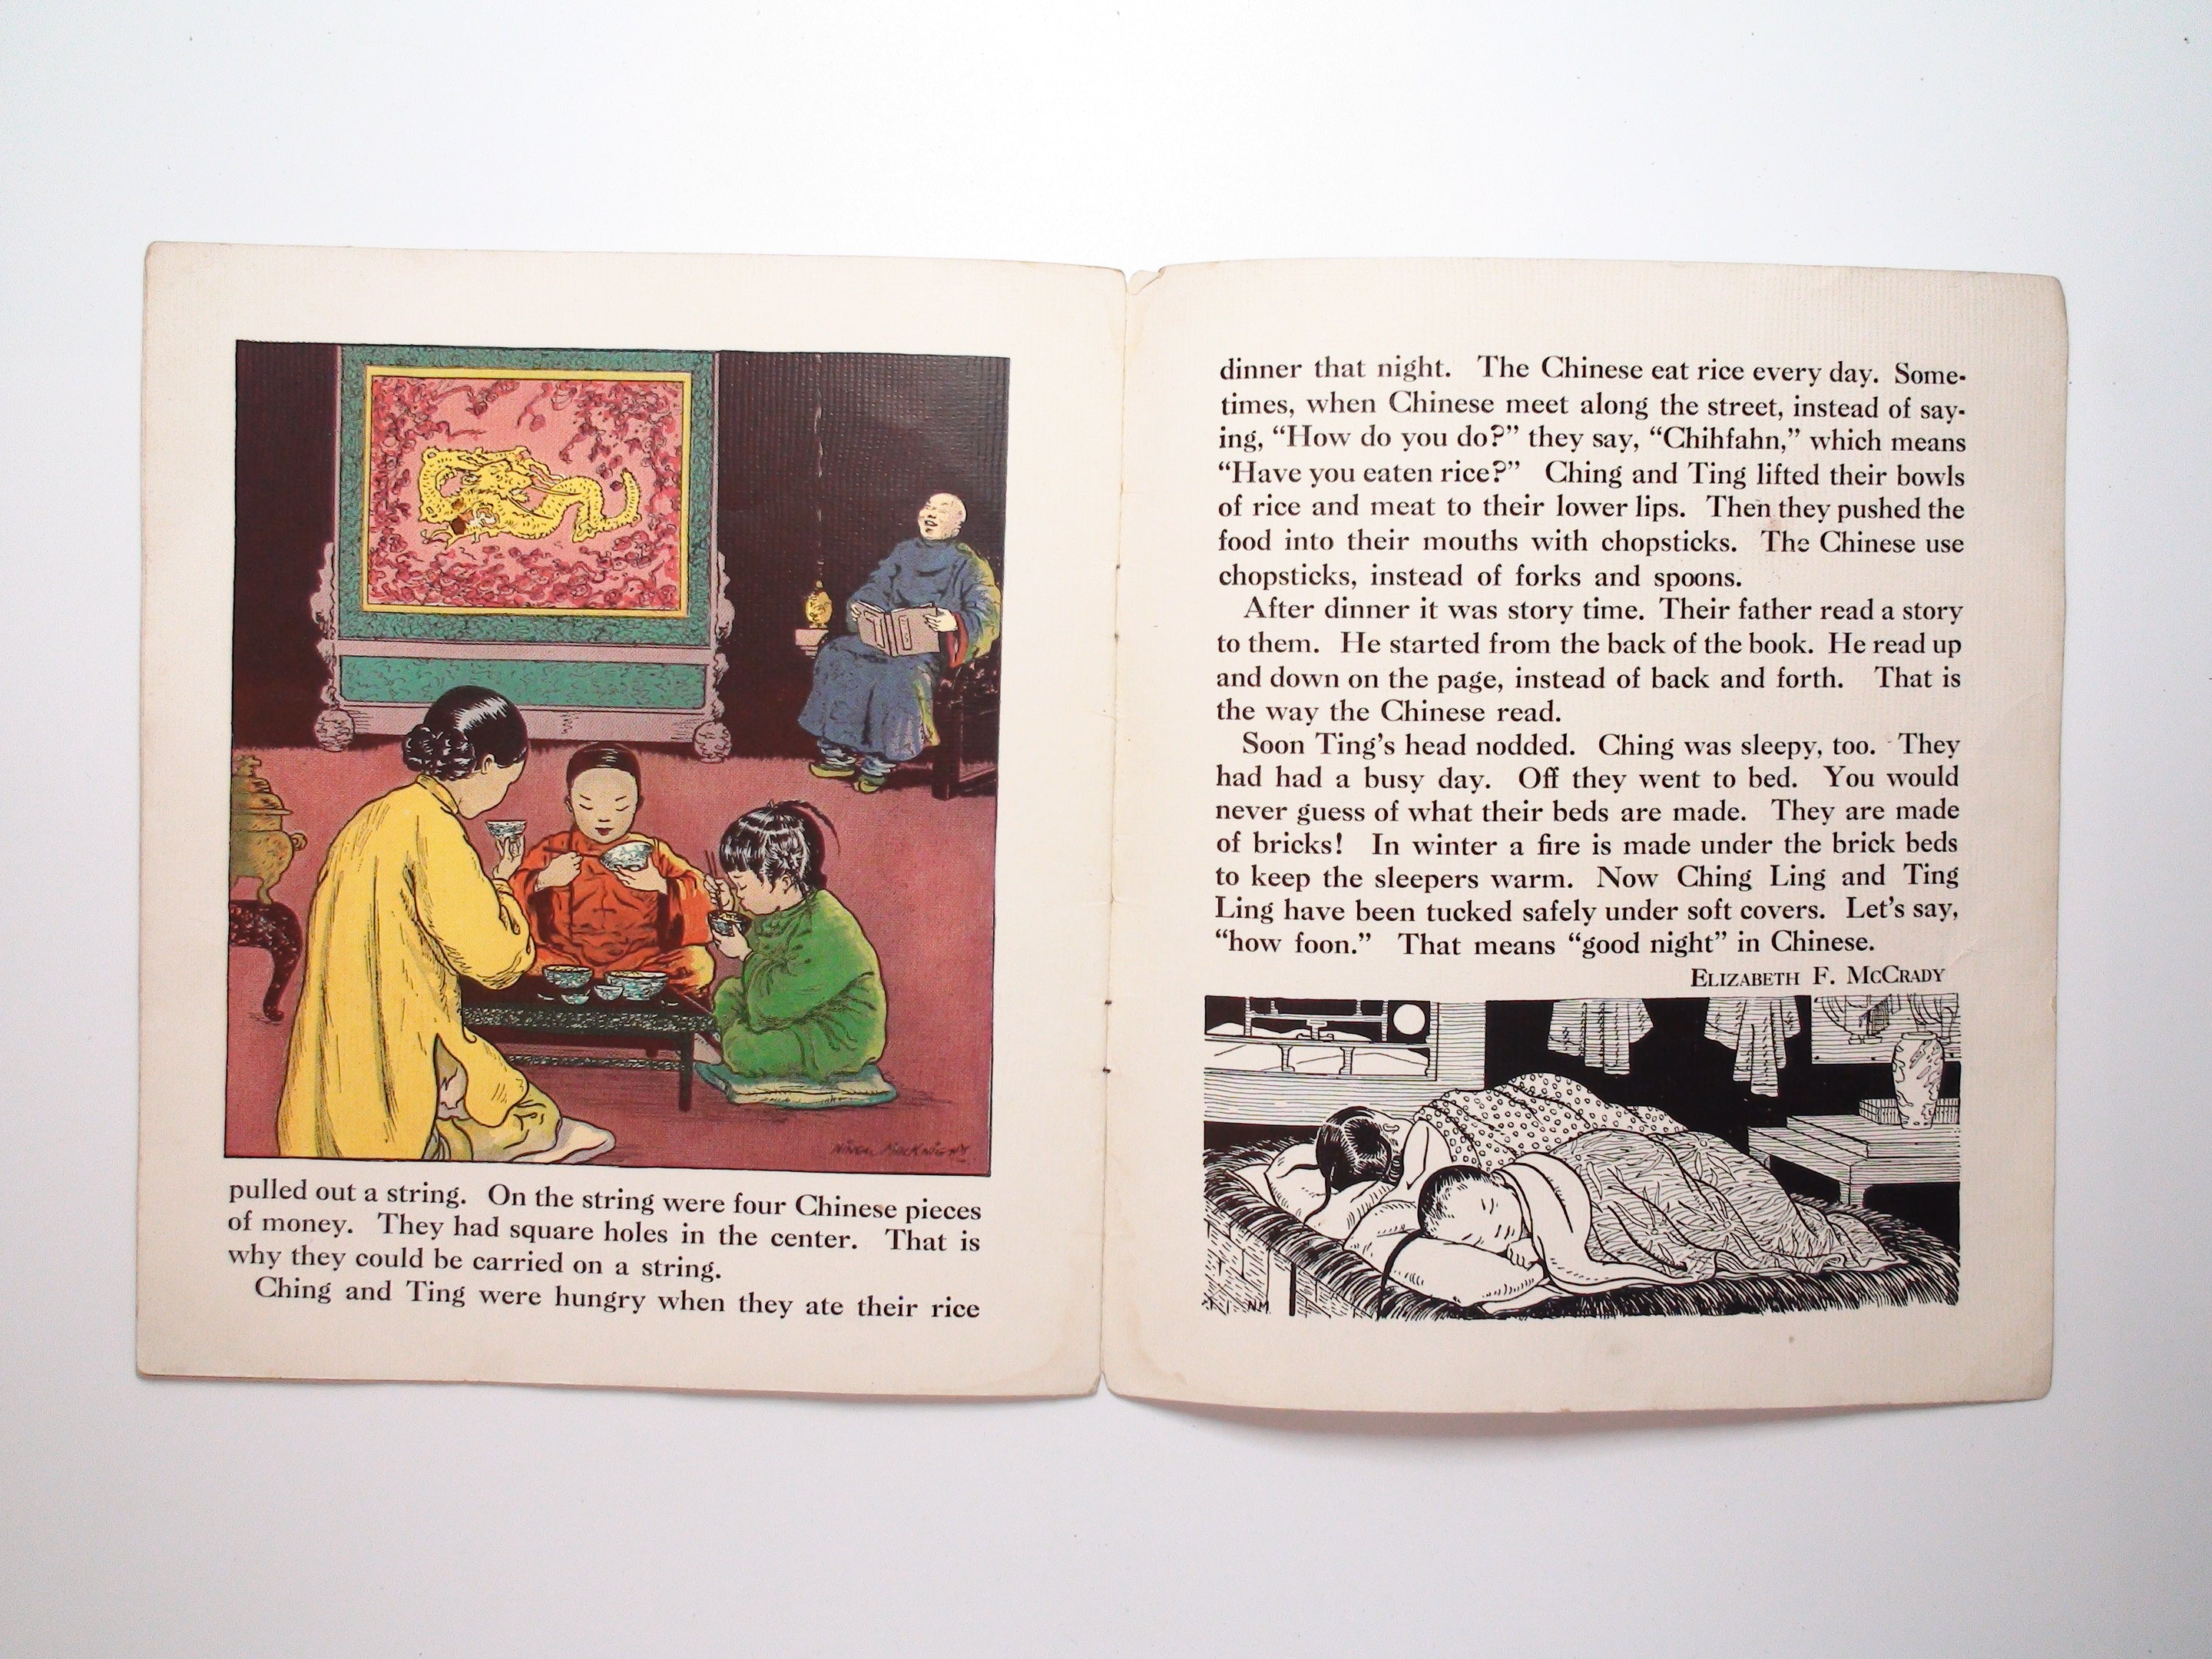 Ching Ling and Ting Ling, by Elizabeth F. McCrady, The Platt & Munk Co., 1936